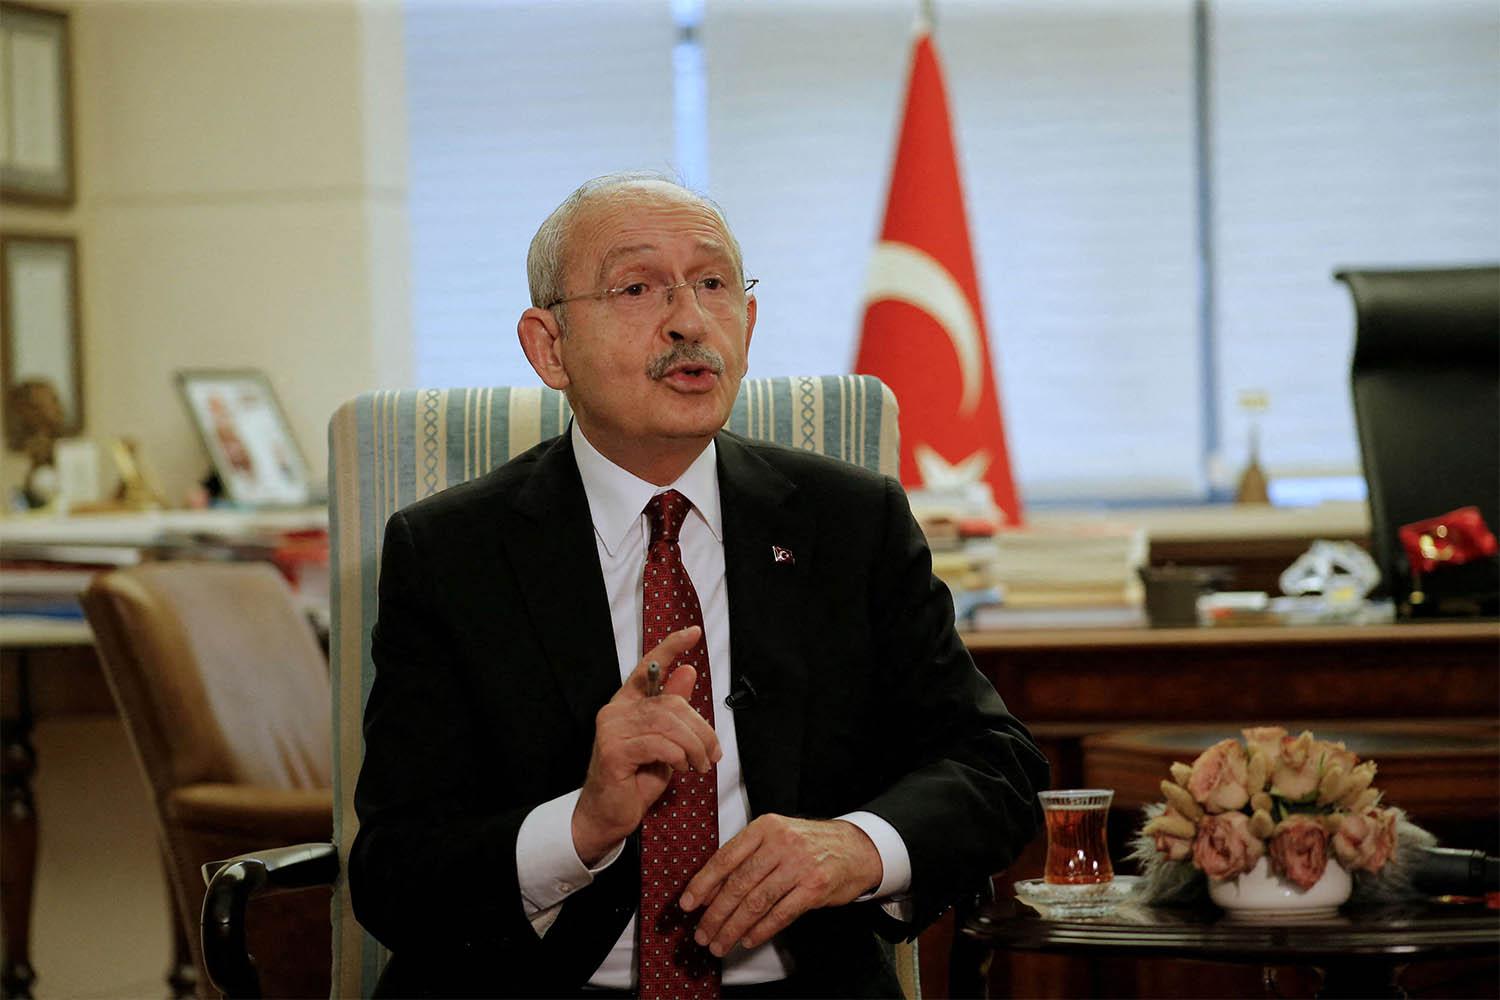 Kemal Kilicdaroglu, the leader of the main opposition Republican People's Party